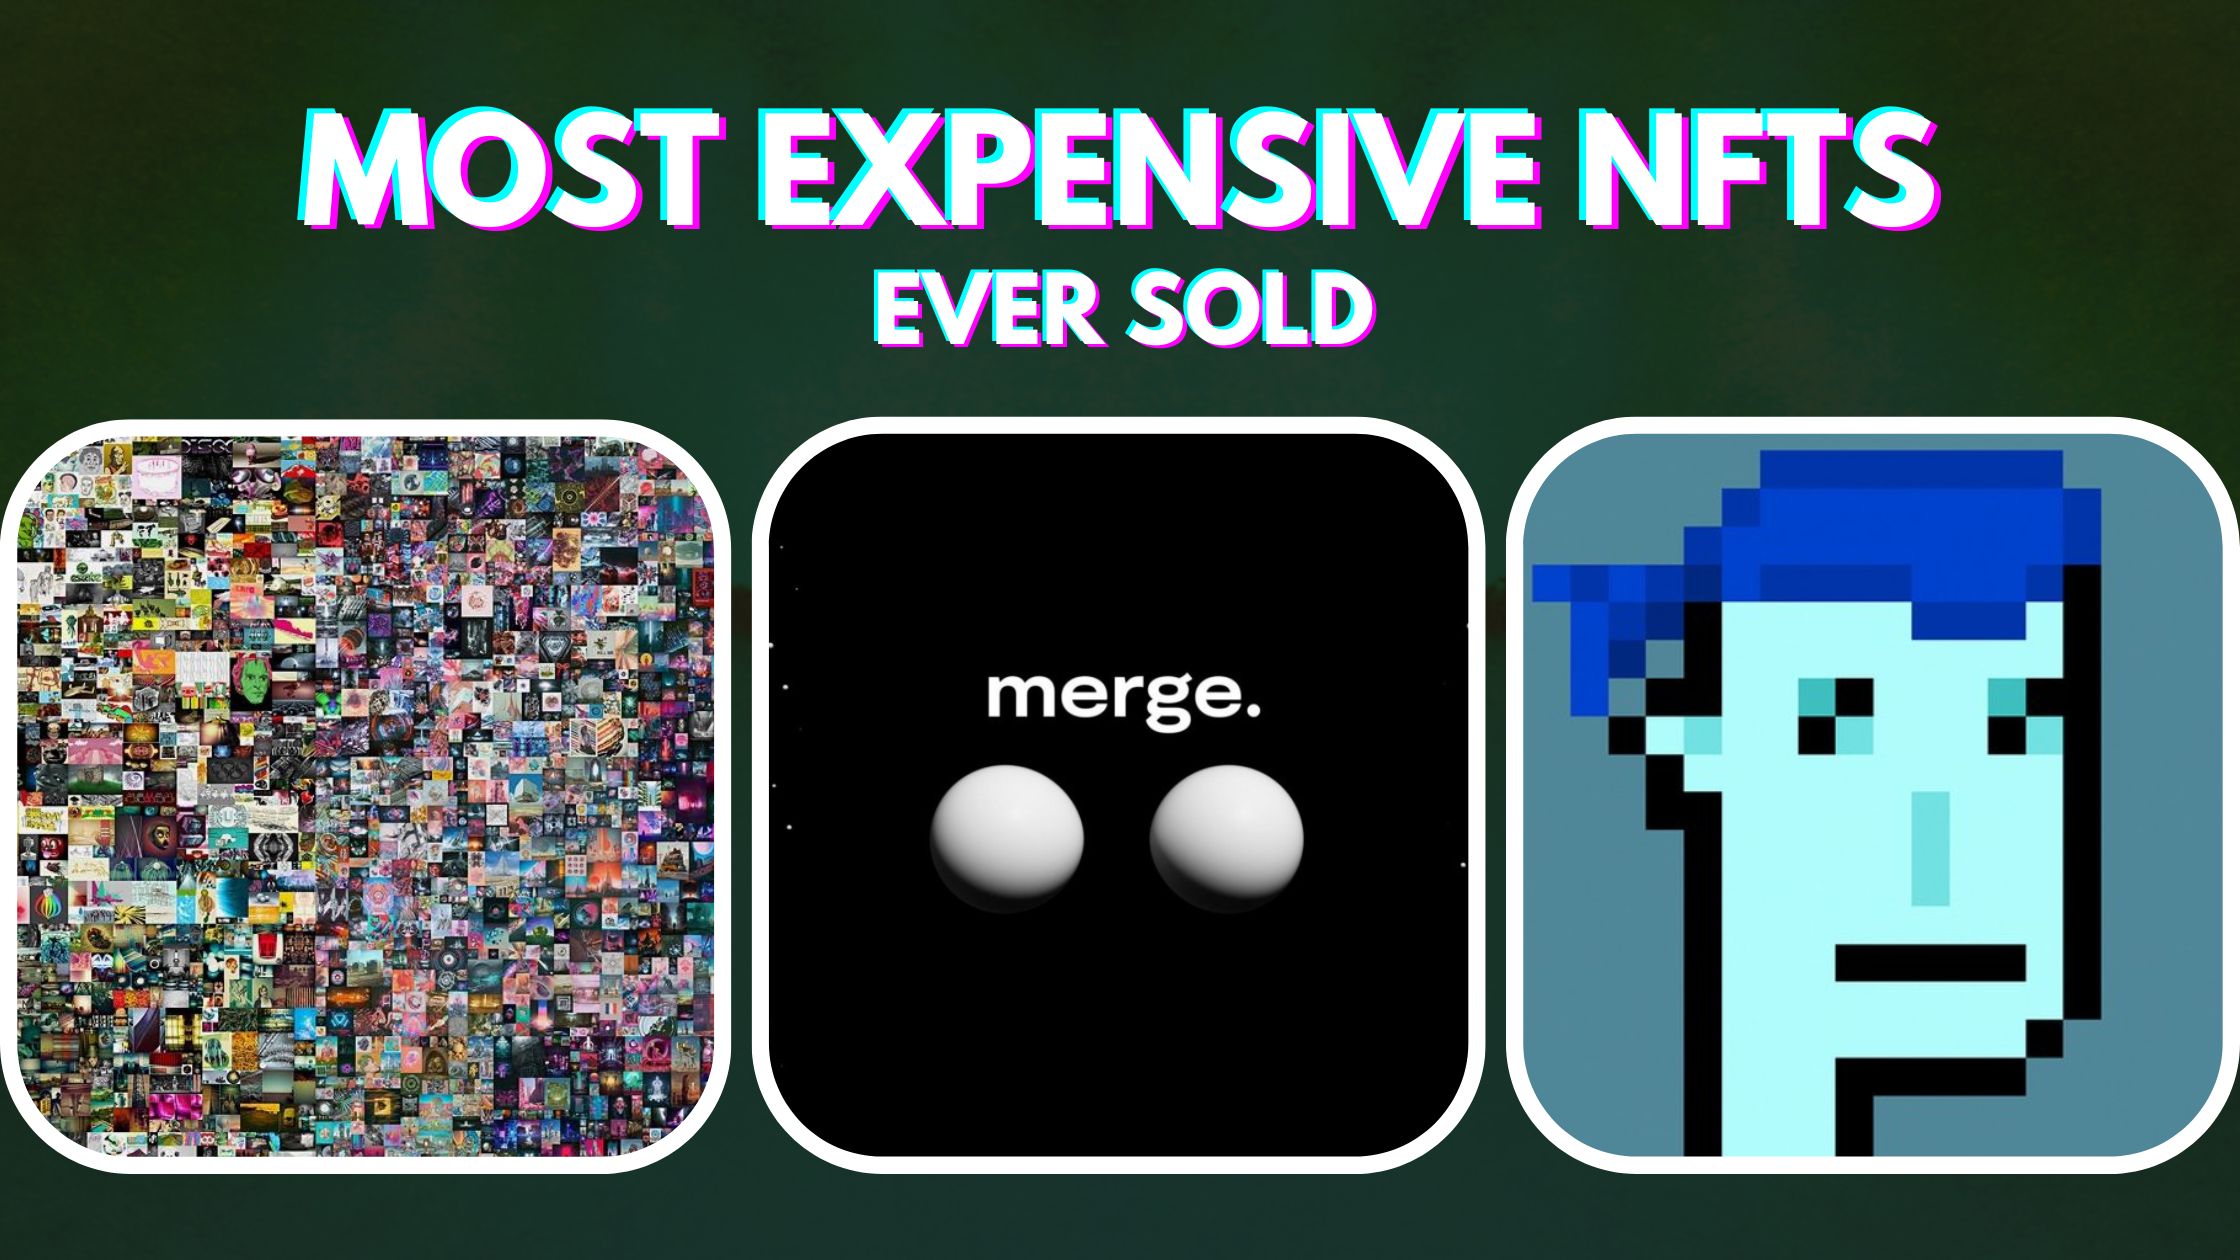 Top 10 Most Expensive NFTs Ever Sold